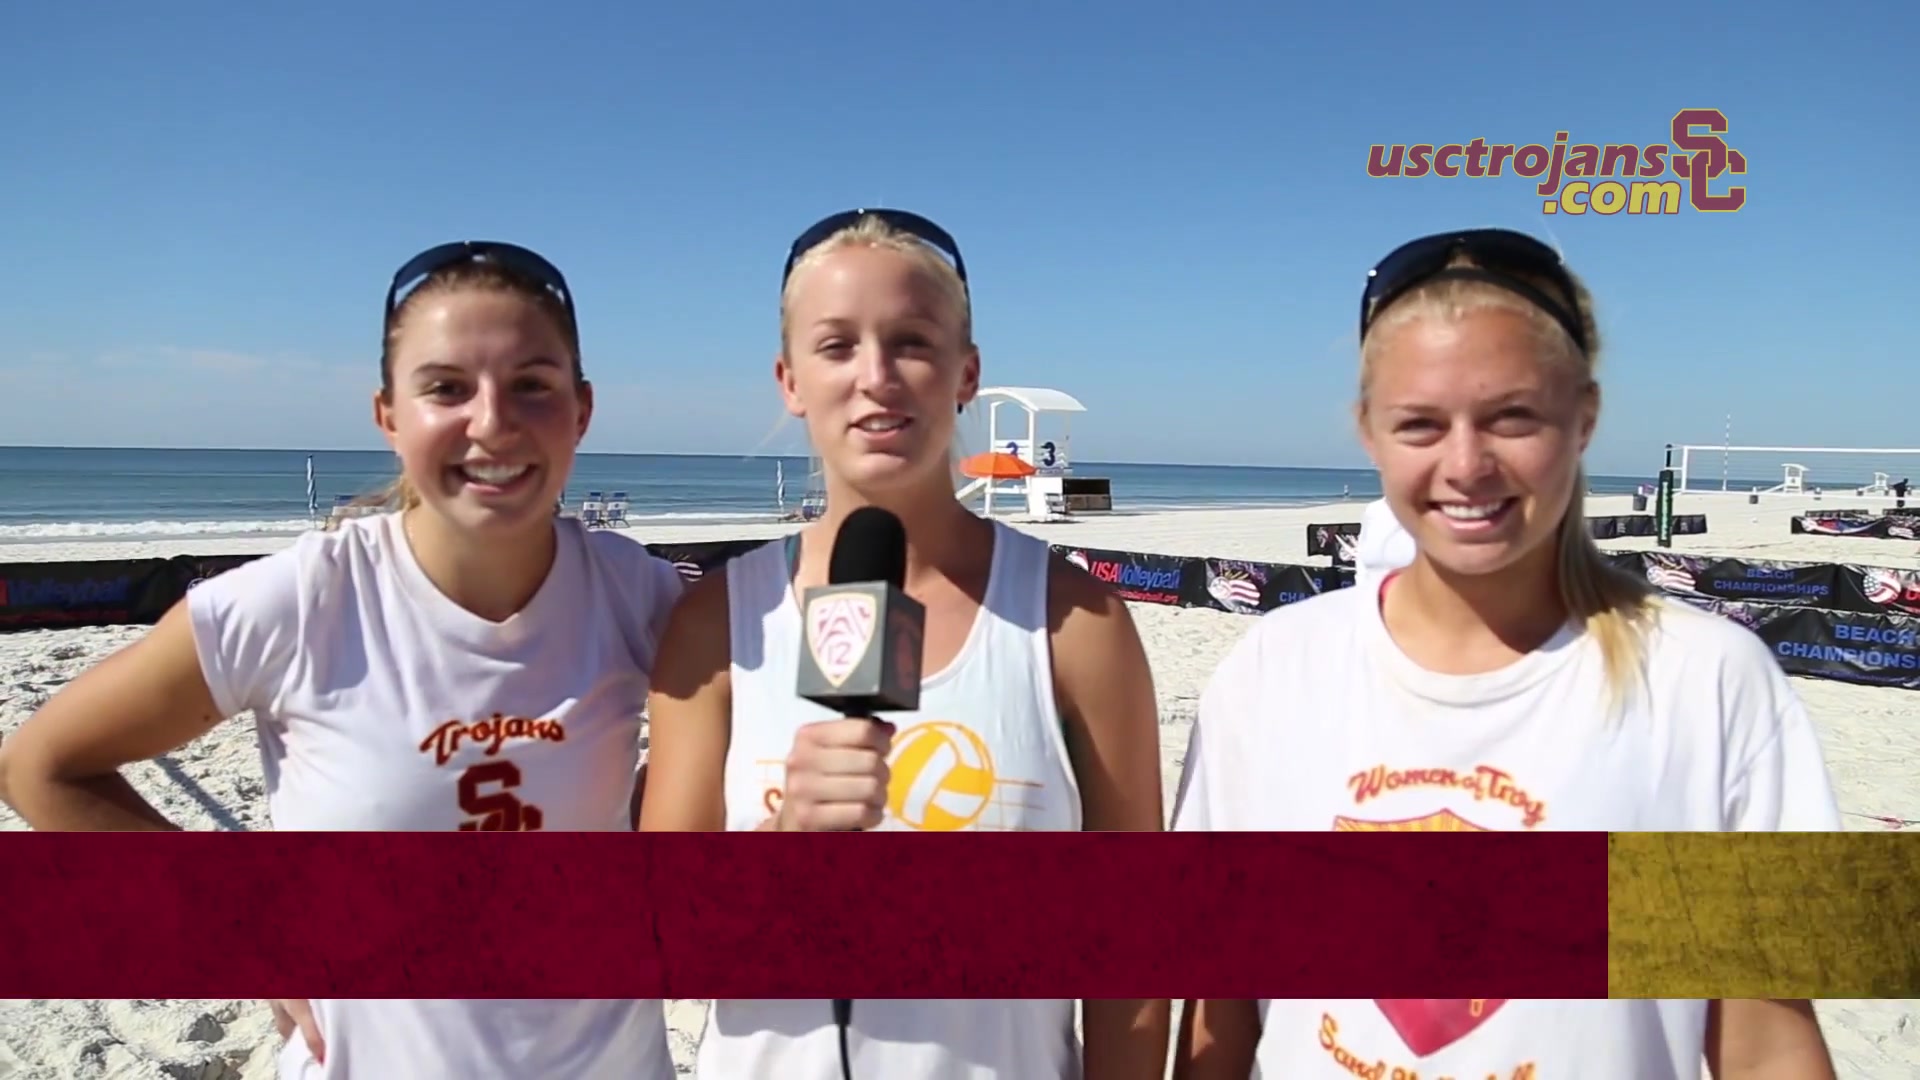 USC Sand Volleyball: AVCA Championship Preview